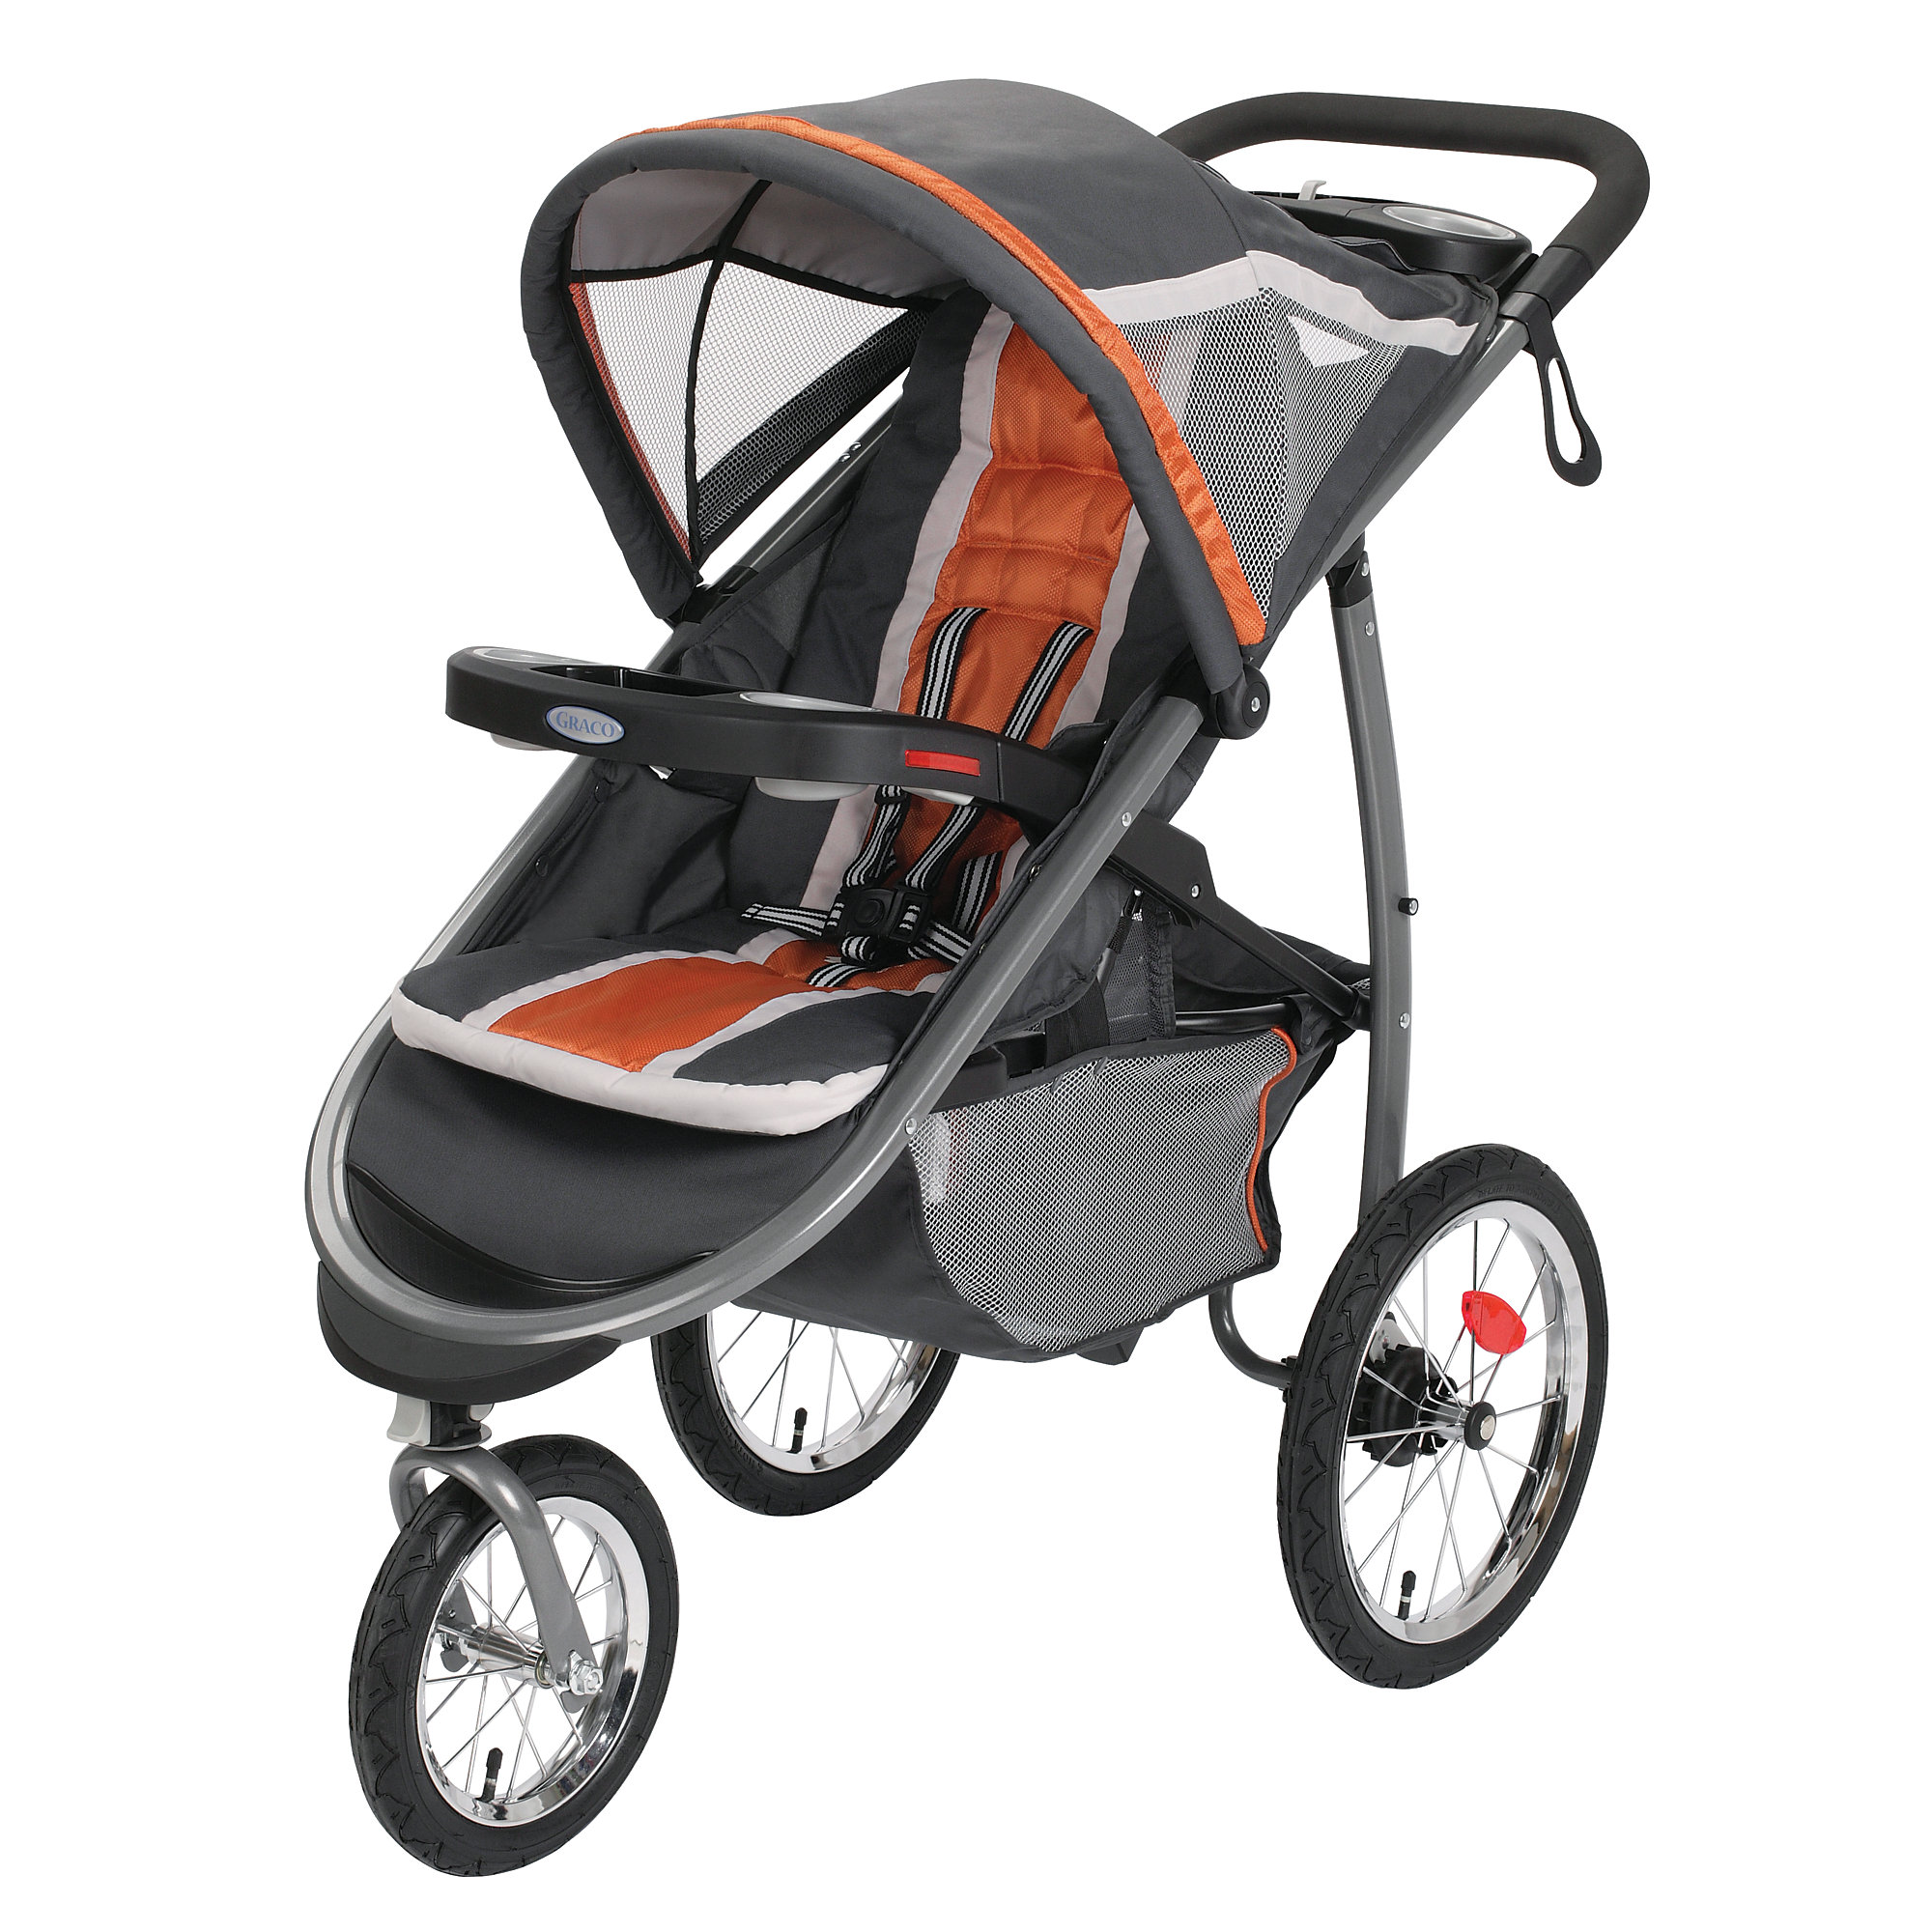 Graco Fast Action Jogger Stroller Click Connect